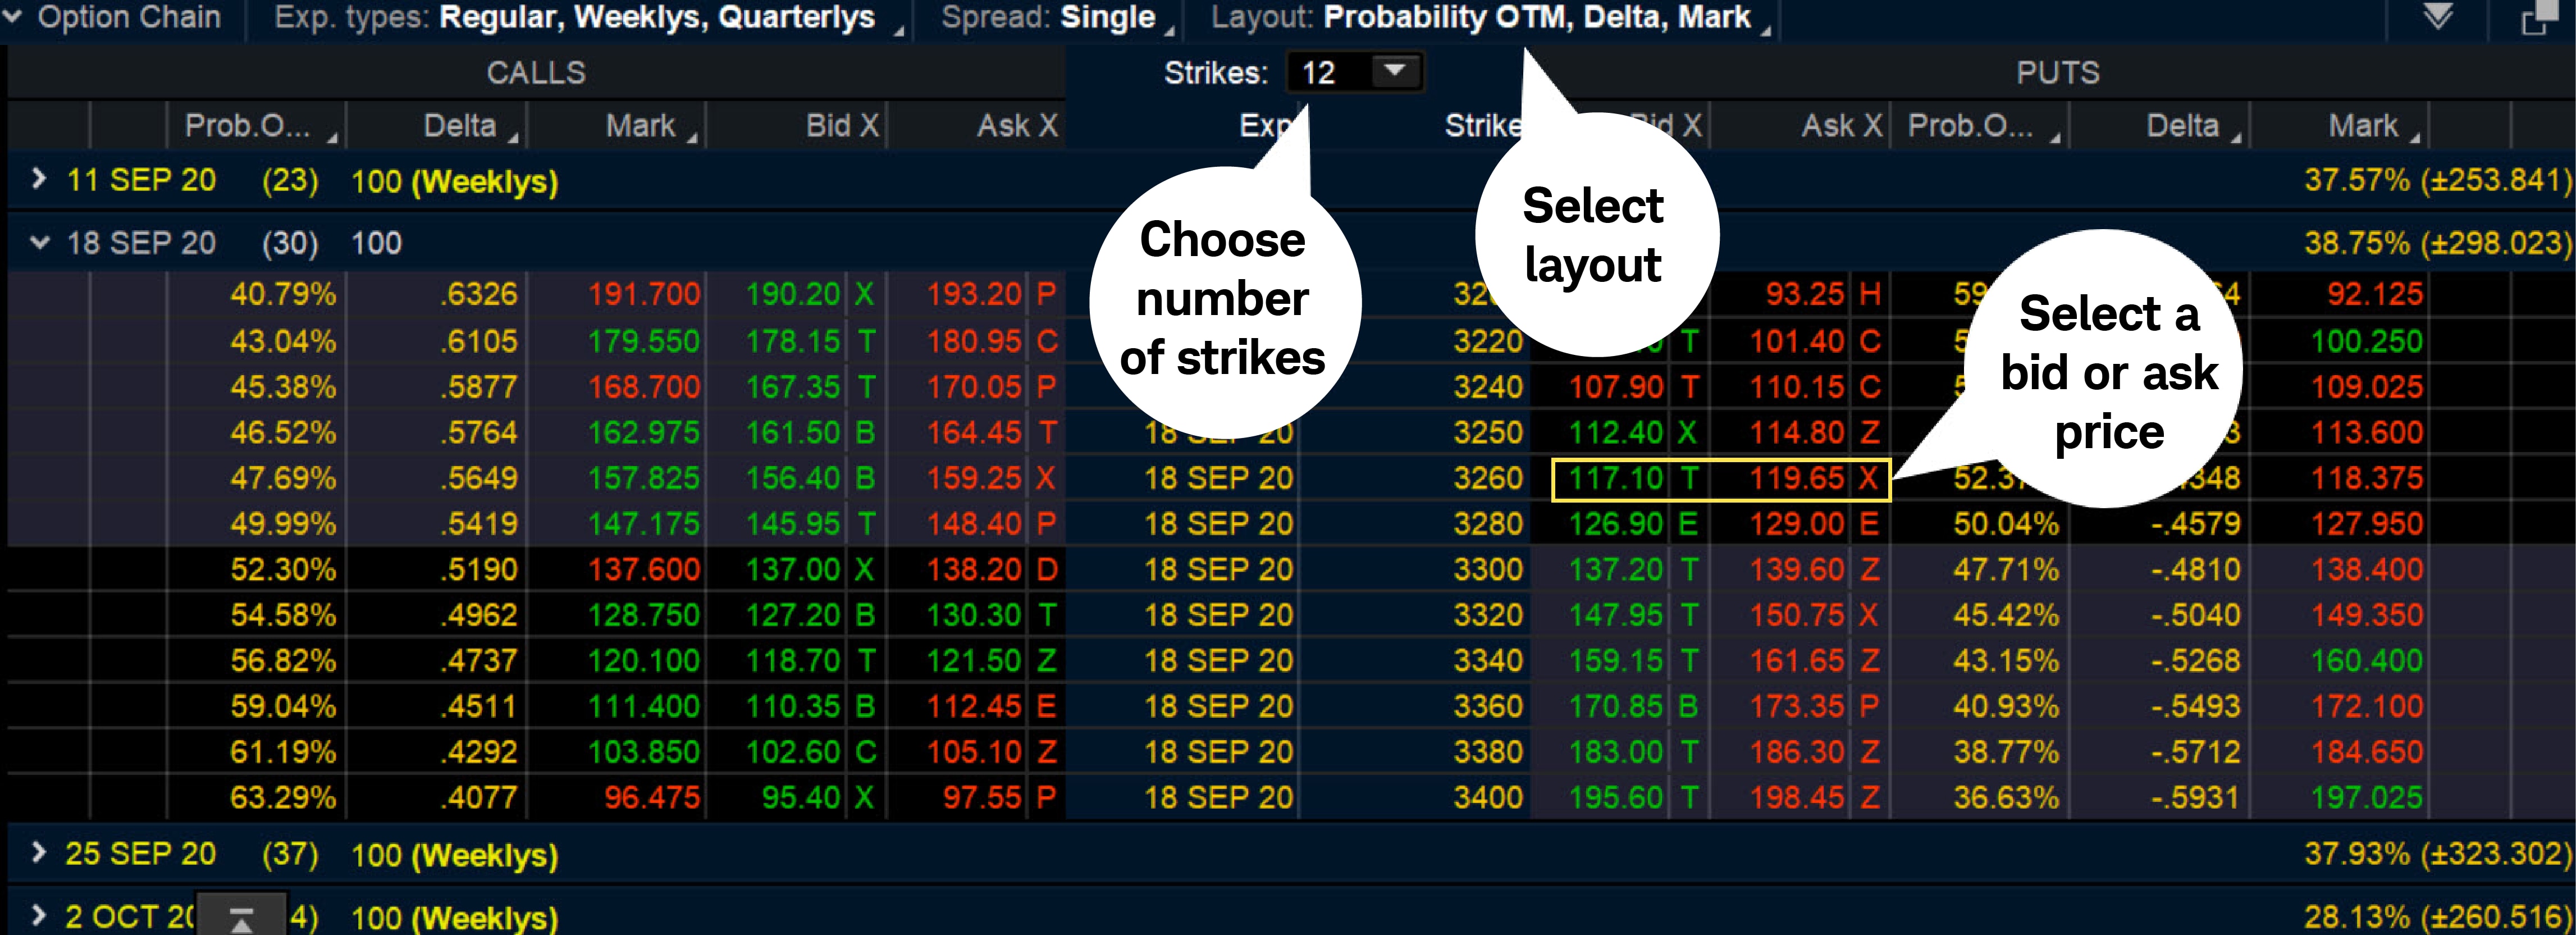 Image displays an options trade. It demonstrates where to choose the number of strikes, select a preferred layout, and where to select a bid or ask price. 